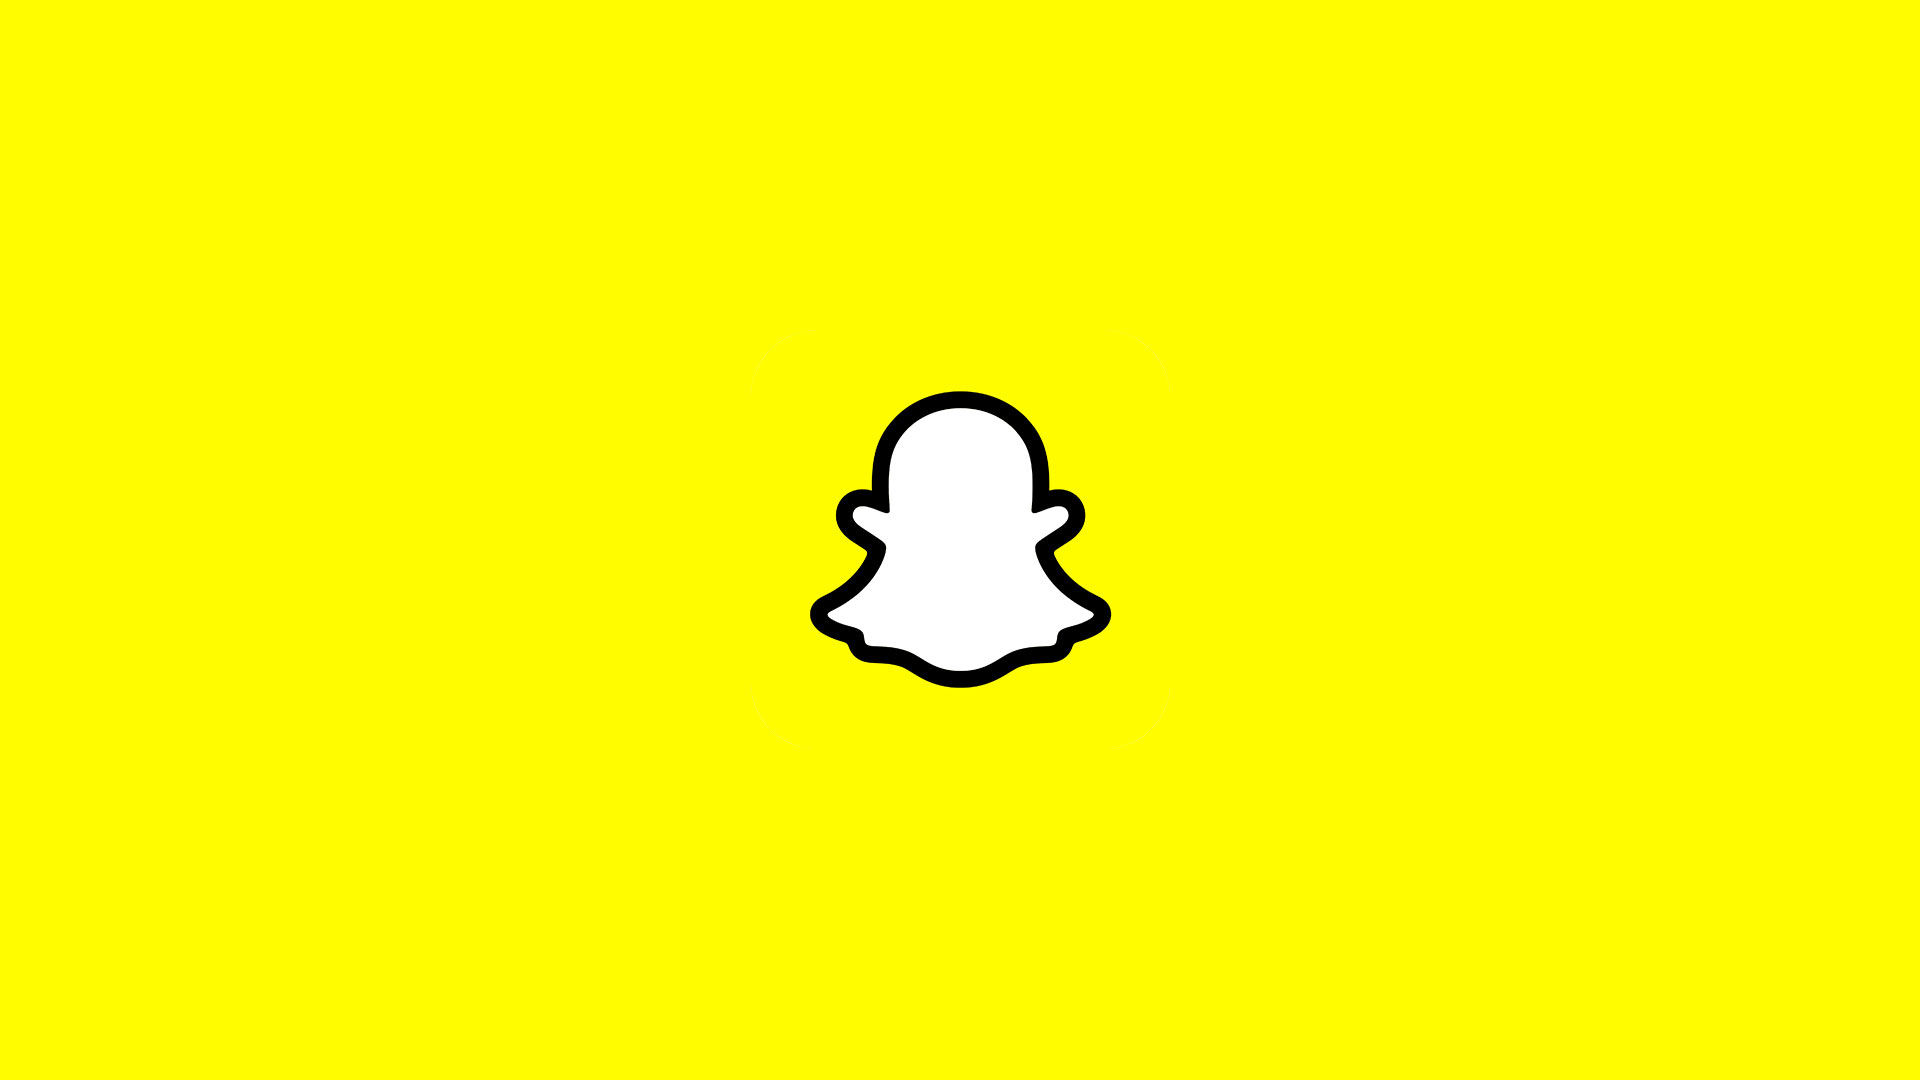 Where to Find Your Snapchat Username